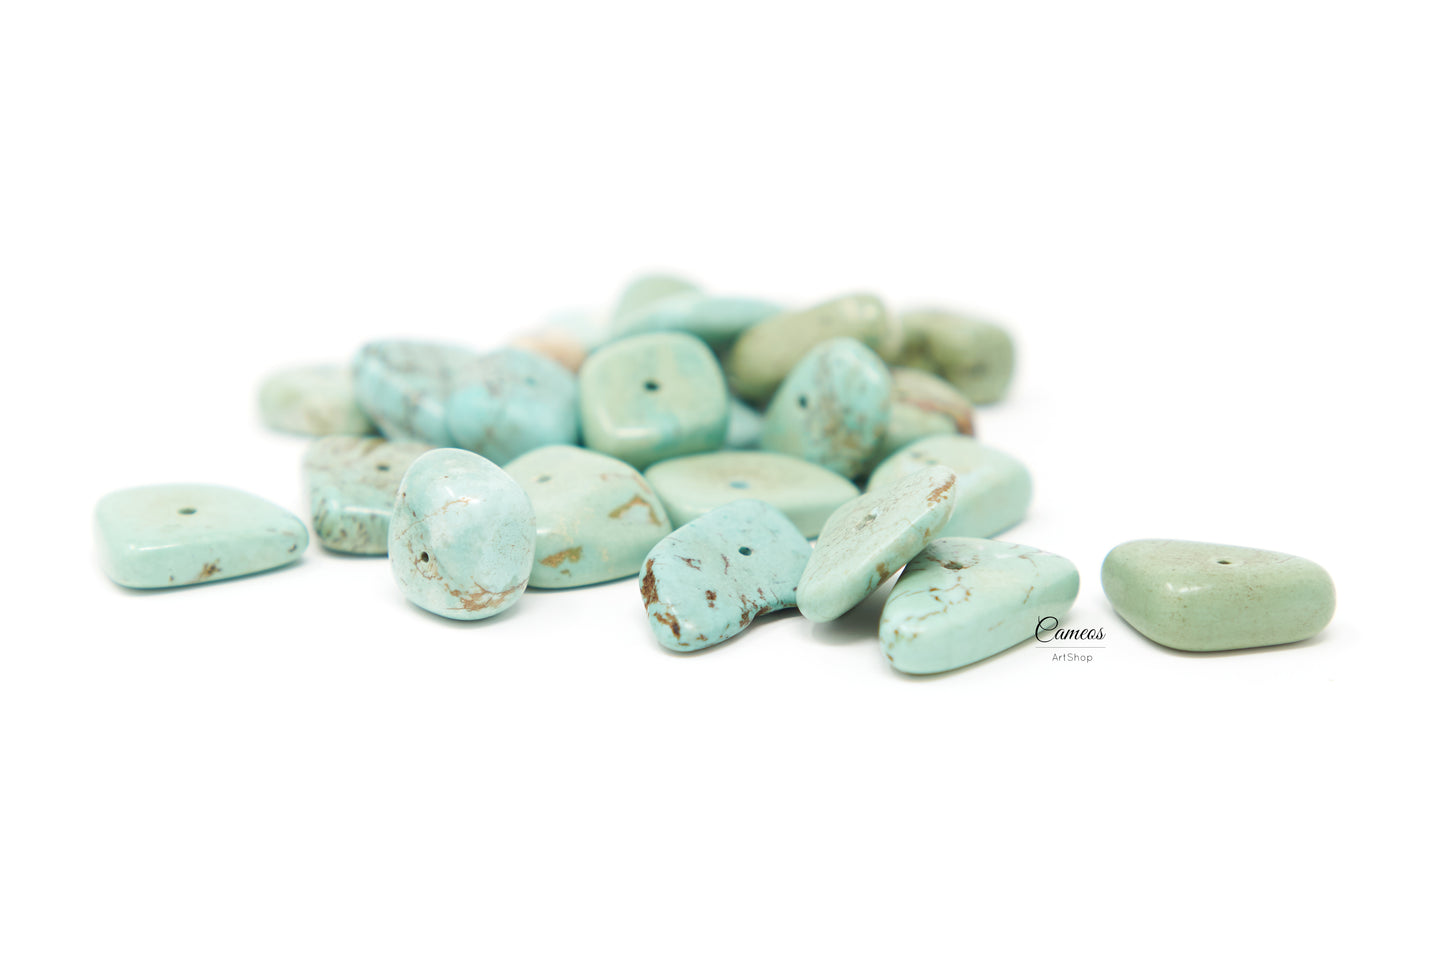 20 Pcs Natural Howlite Beads, Dyed, Chip Howlite Beads, Loose Gemstone Beads, Polished Howlite, Turquiose Stone